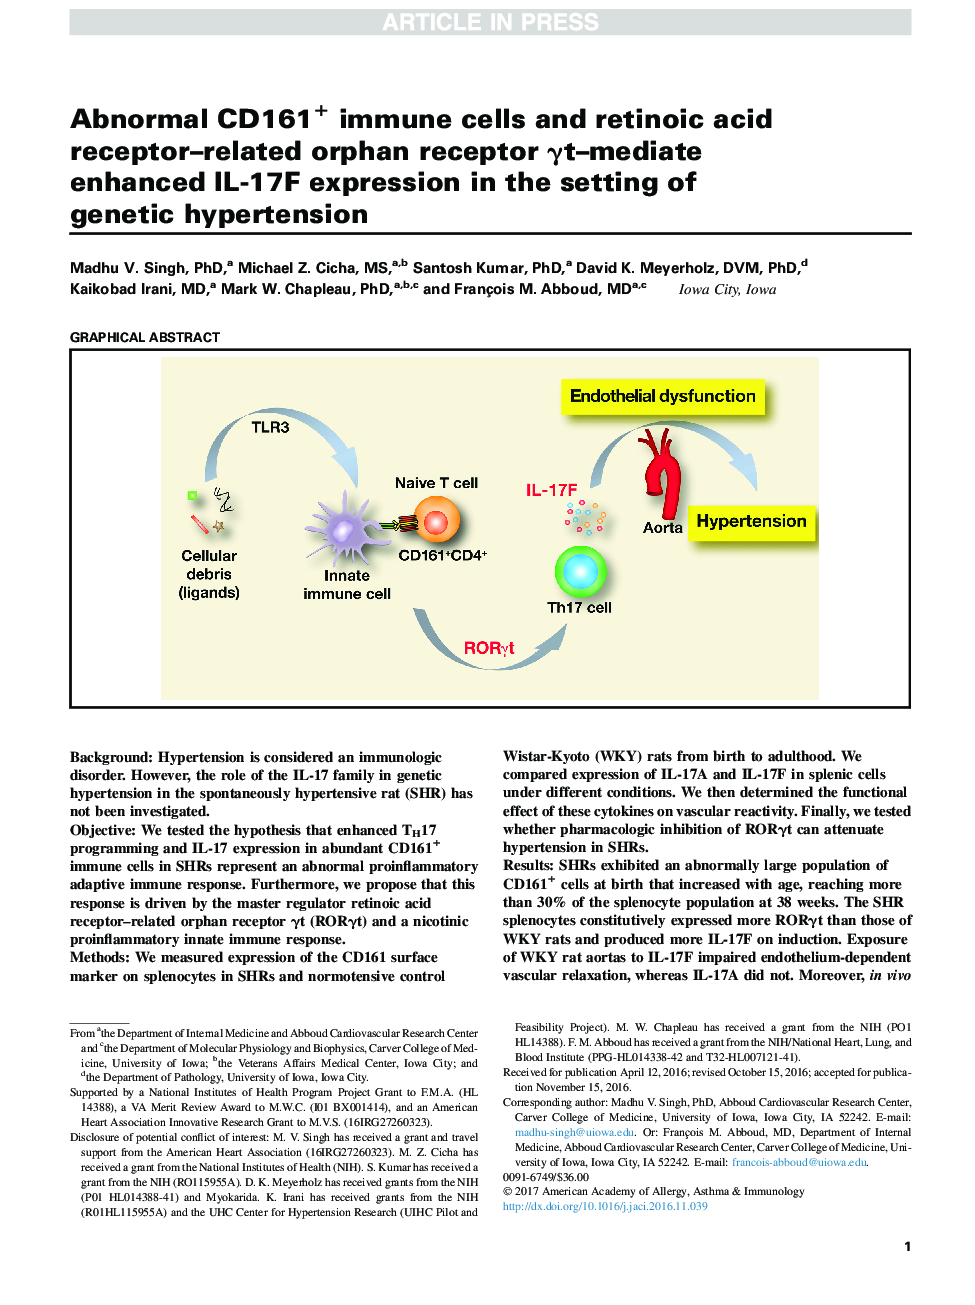 Abnormal CD161+ immune cells and retinoic acid receptor-related orphan receptor Î³t-mediate enhanced IL-17F expression in the setting of genetic hypertension